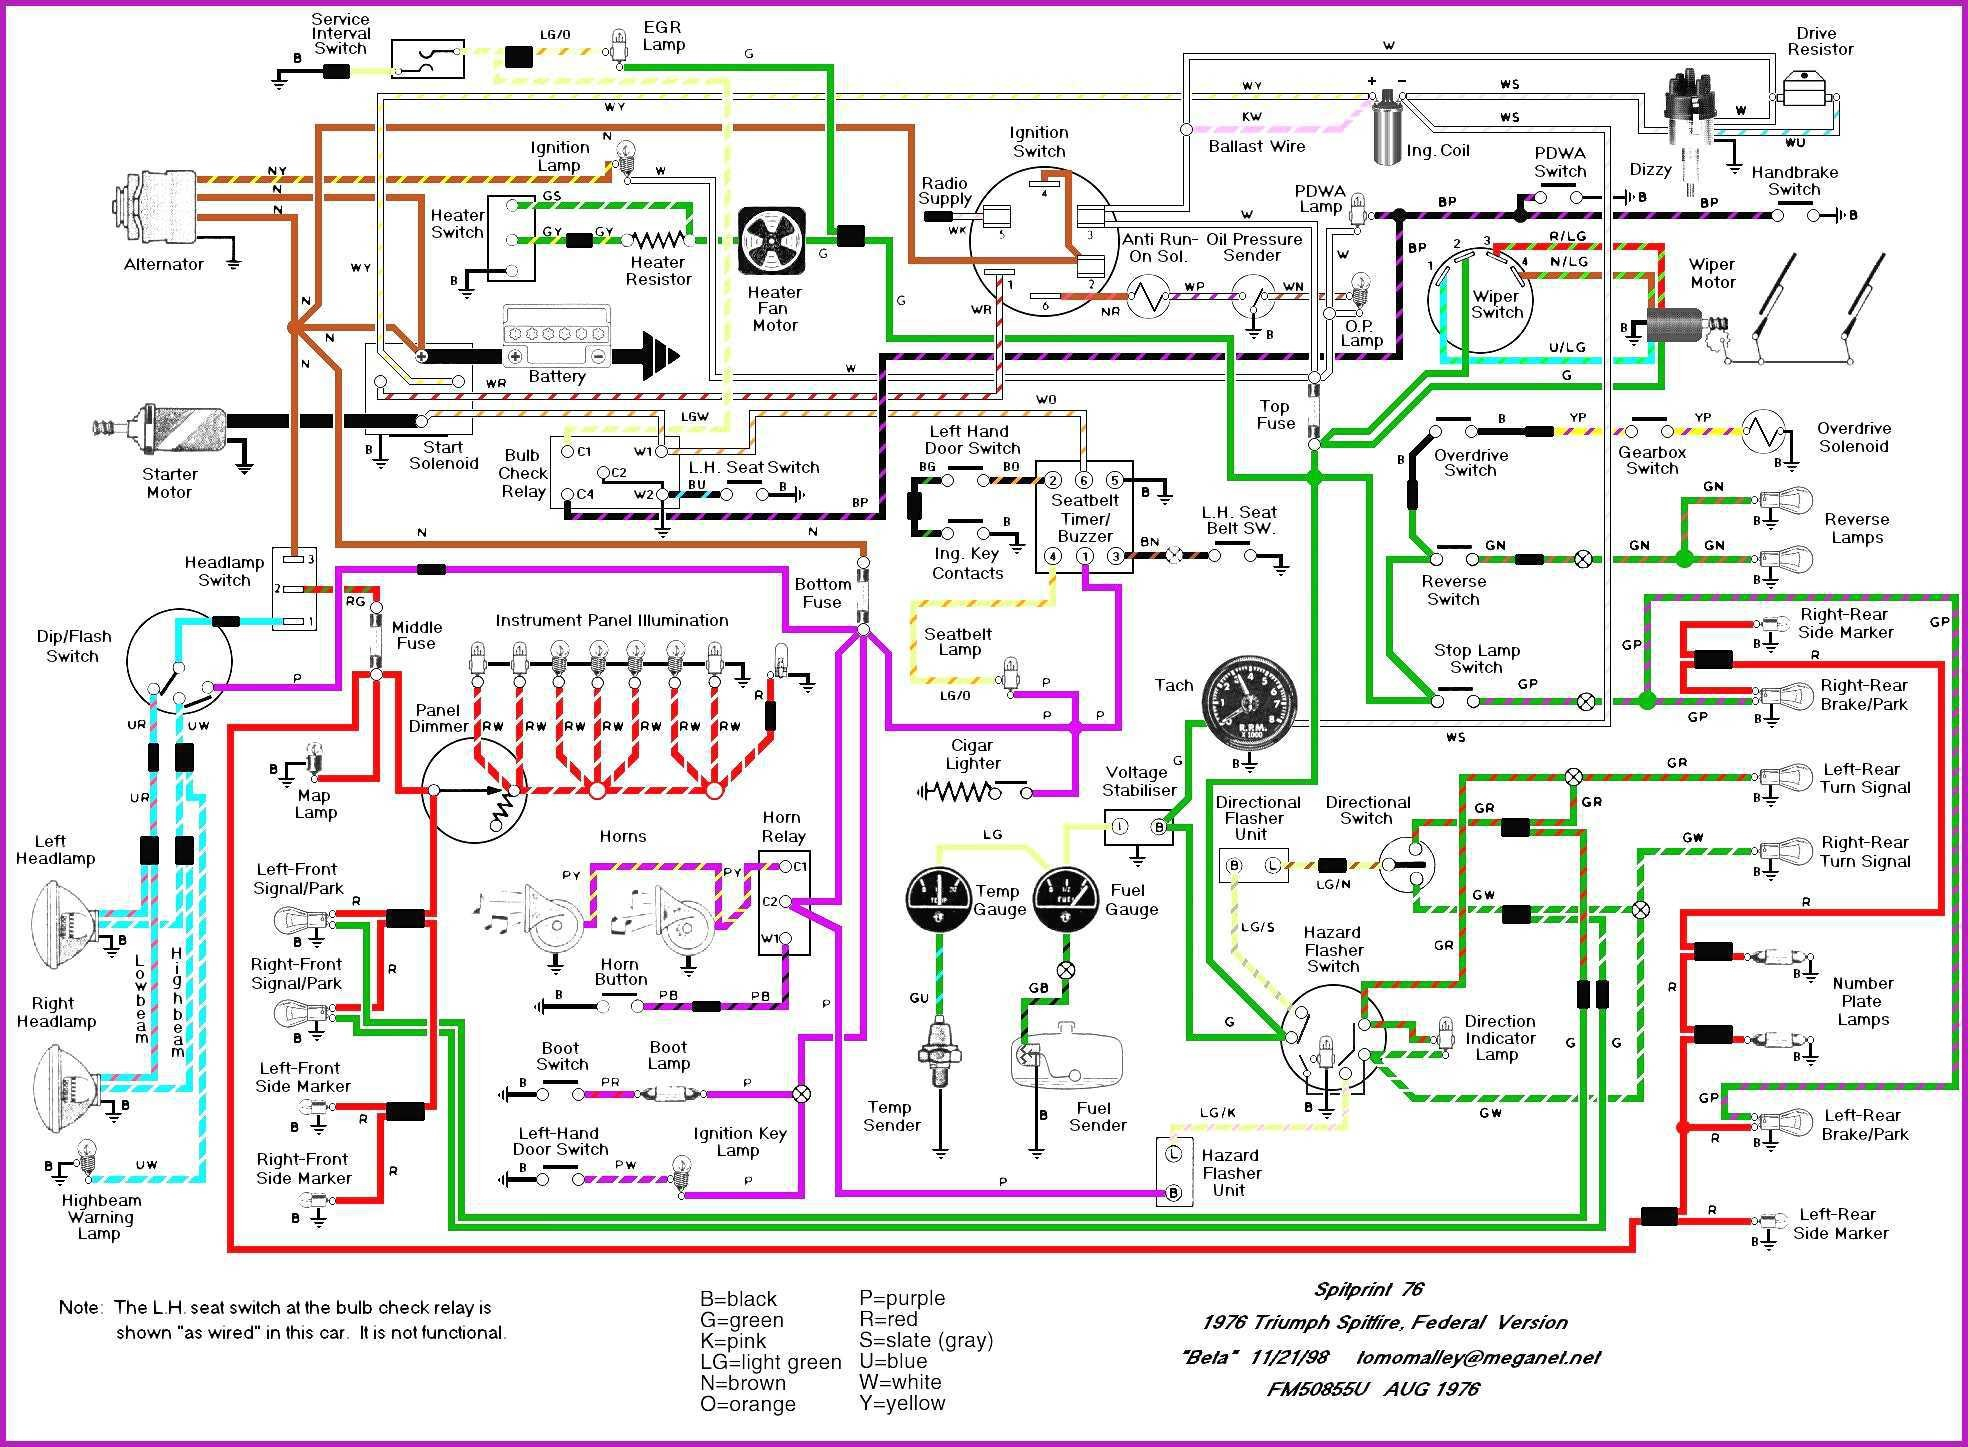 House Electrical Plan Software Best Of Wiring Diagram Free Download - Electrical Wiring Diagram Software Free Download